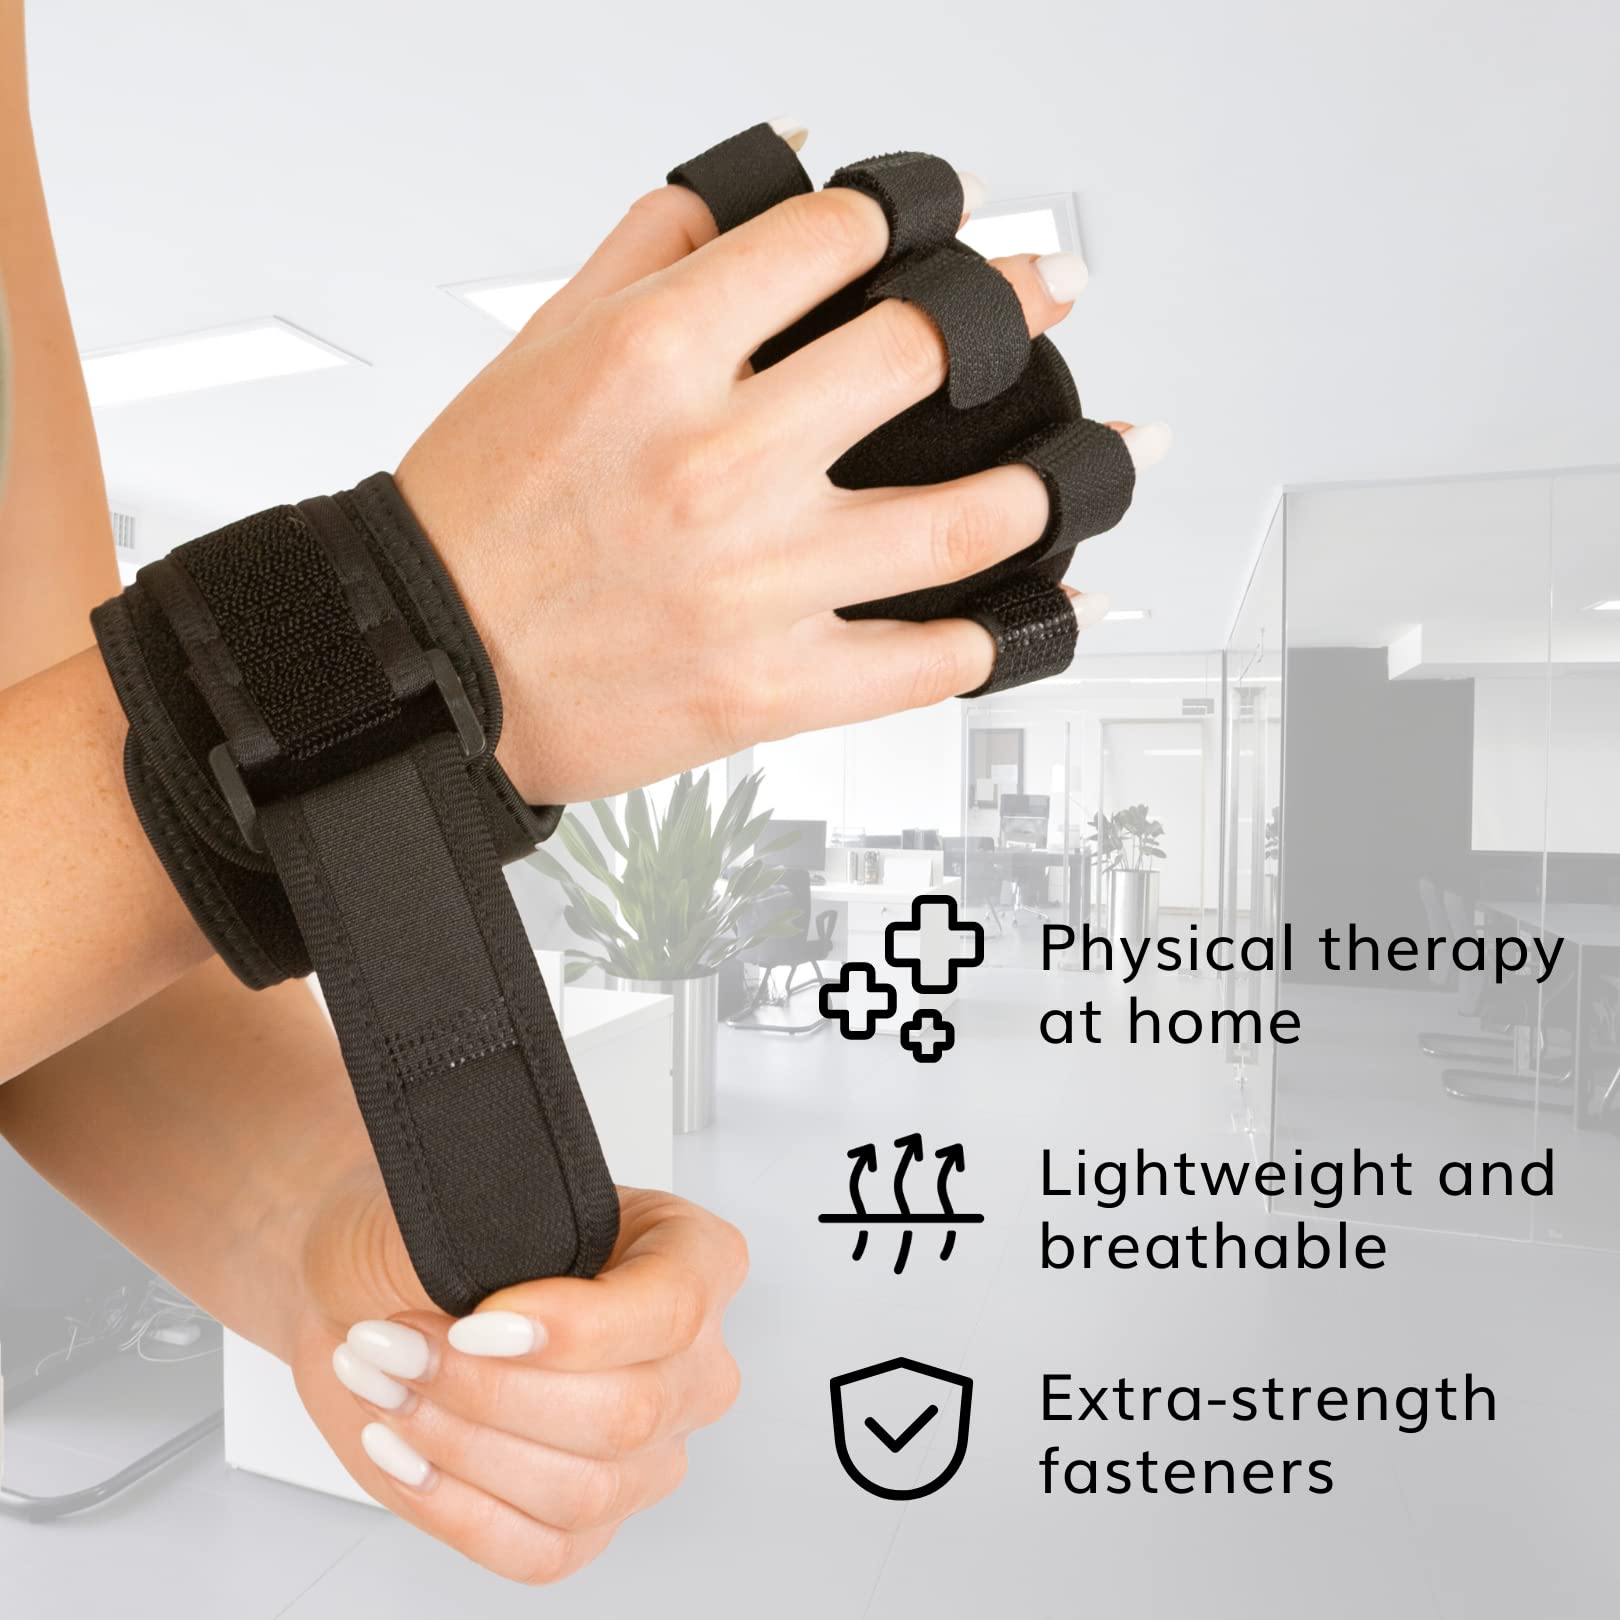 BraceAbility Anti Spasticity Splint - Contracture Stroke Resting Hand Orthosis Brace and Ball for Right or Left Cramp Relief, Twitching Pain, Recovery Therapy, Dupuytren's Treatment, Arthritis Remedy